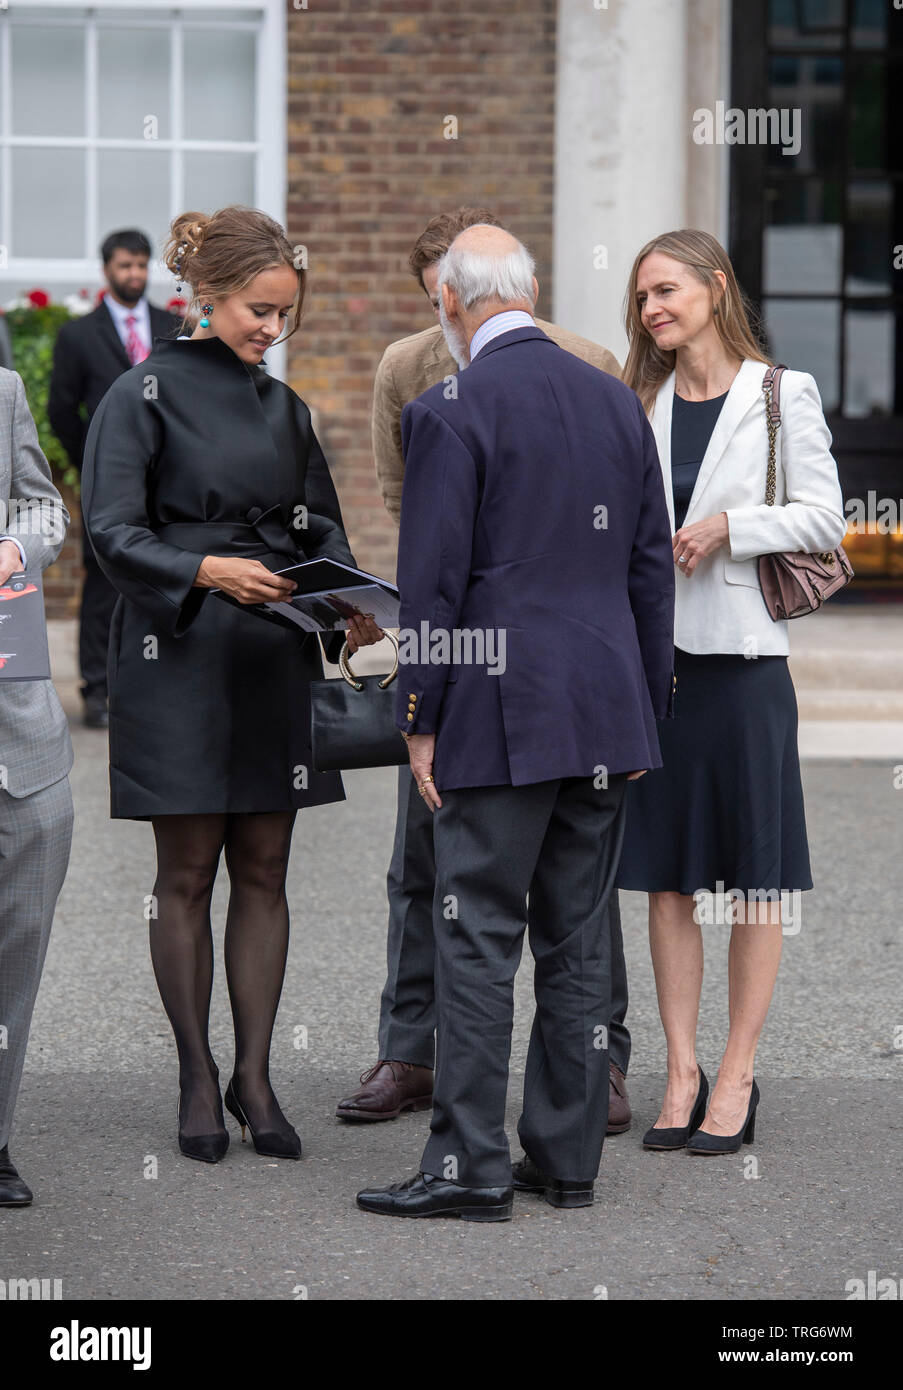 Honourable Artillery Company HQ, London, UK. 5th June 2019. Over 120 motoring greats, worth over £70m, on display from 5-6 June at HAC grounds, with special guest HRH Prince Michael of Kent. Credit: Malcolm Park/Alamy Live News. Stock Photo